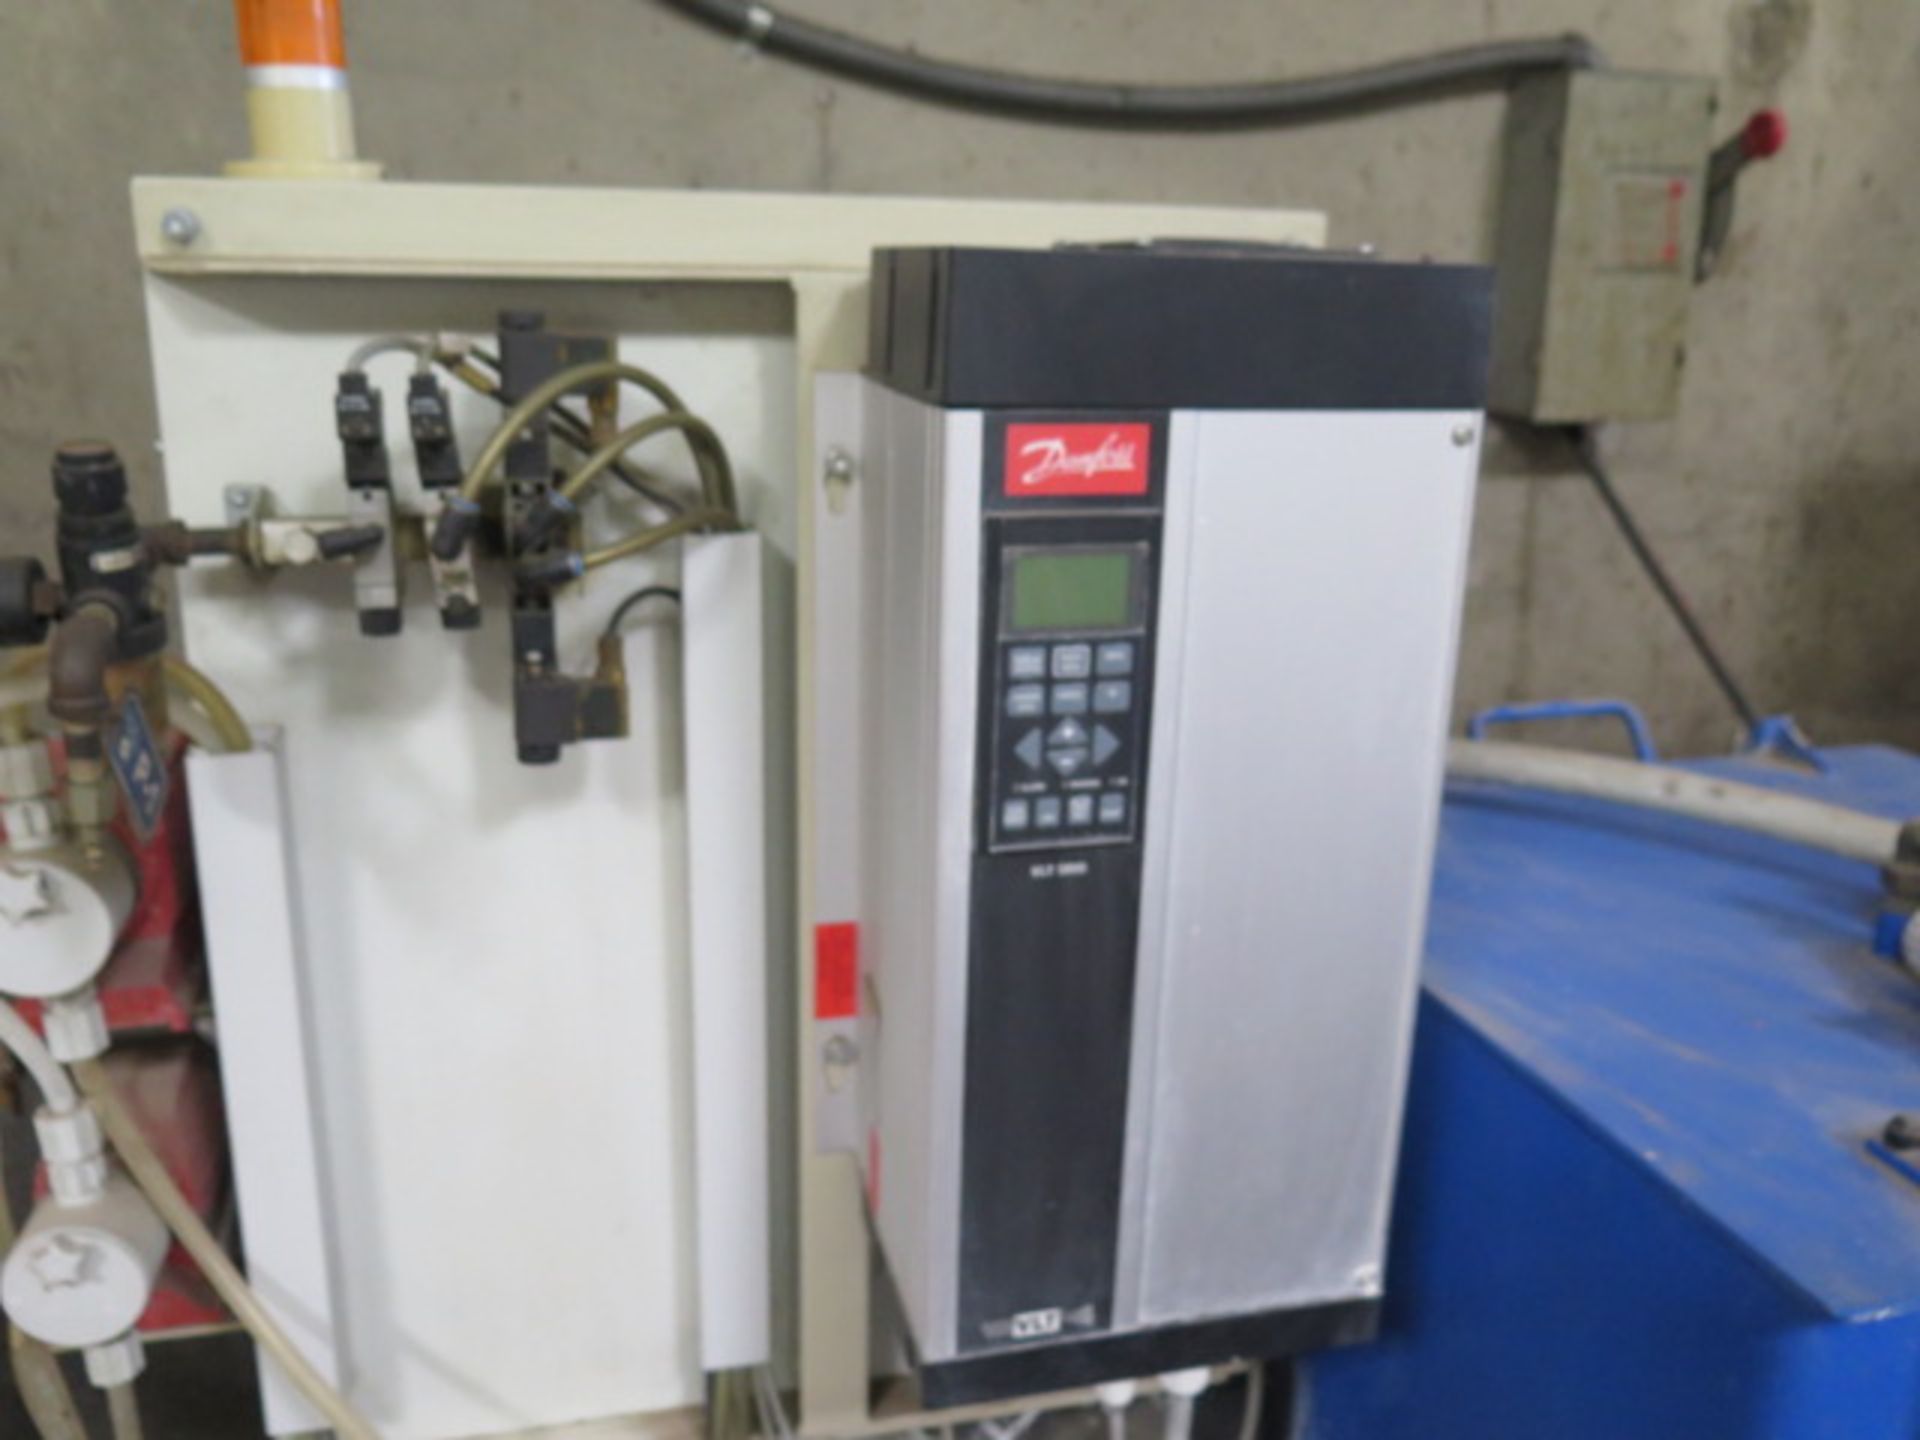 Almco V-17 DTC Media Tumbler s/n 050106 w/ Almco Controls, Slurry Dispenser, SOLD AS IS - Image 8 of 15